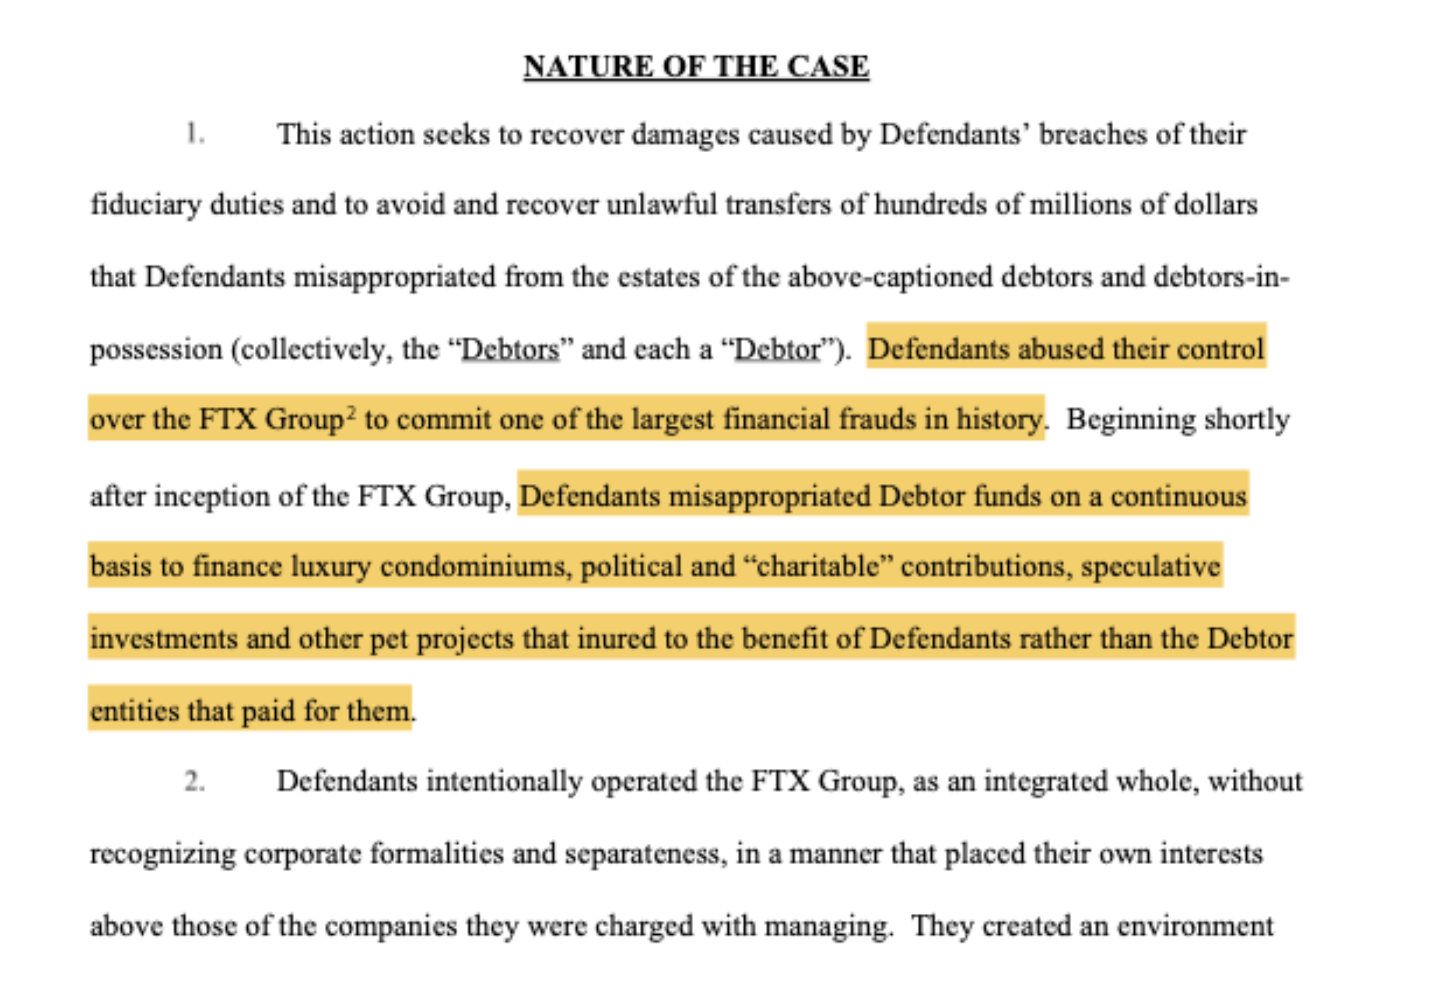 Excerpt from FTX's complaint against Bankman-Fried, Ellison and others. Source: Kroll